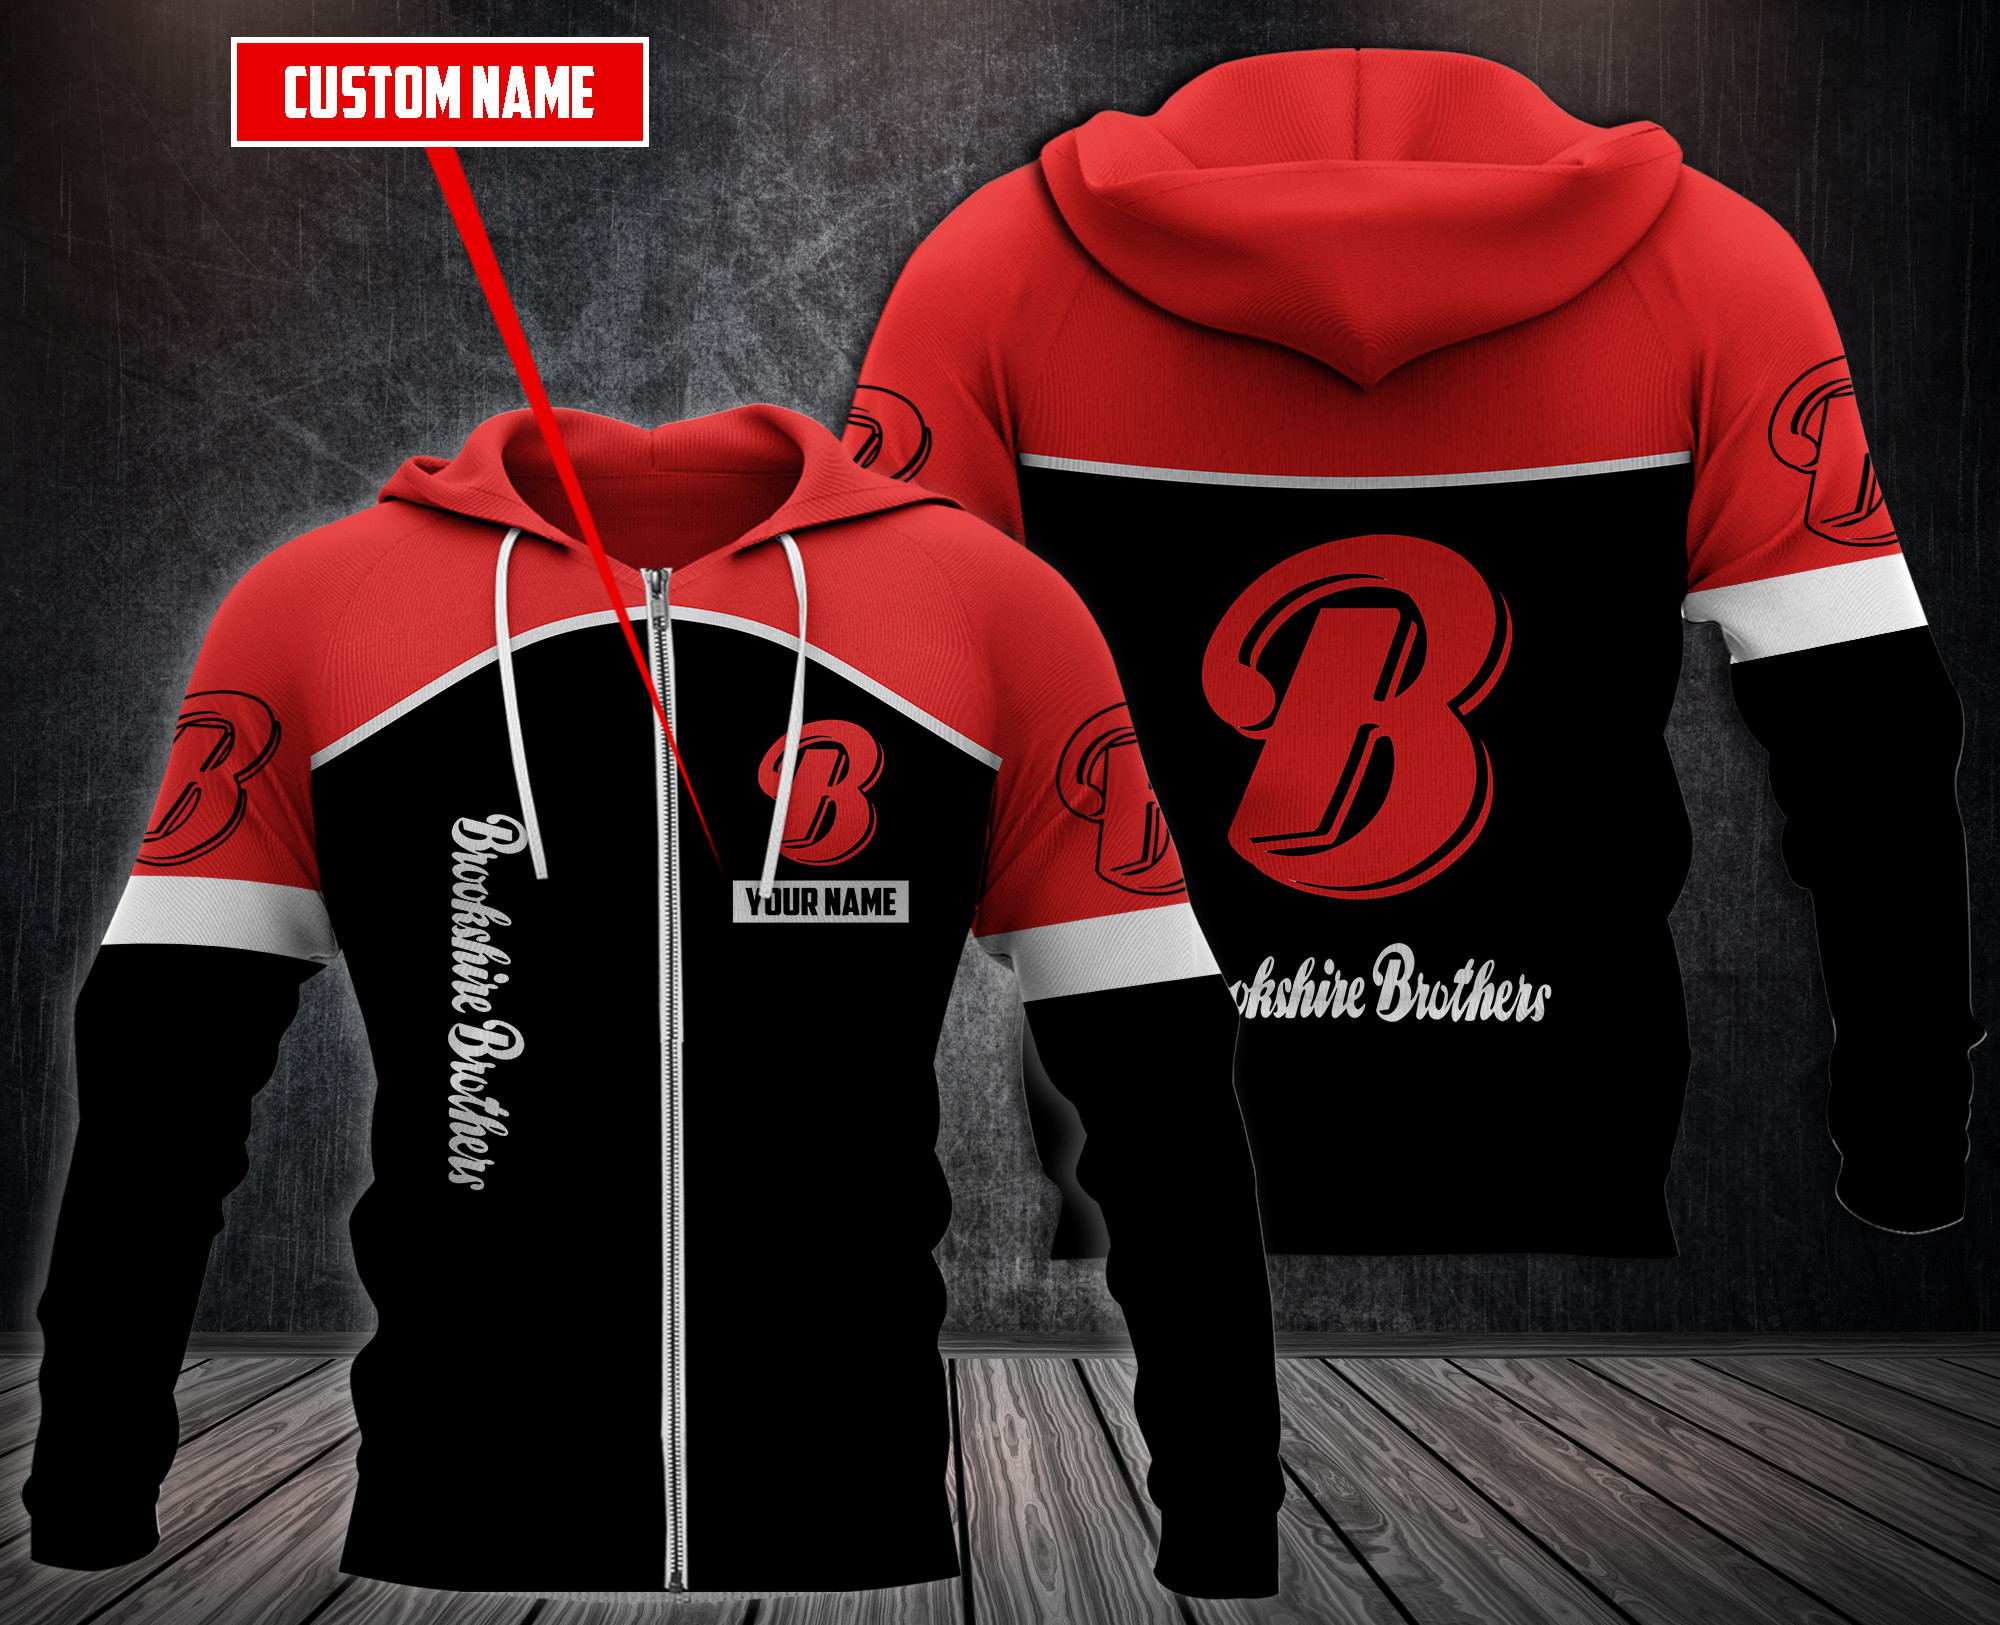 Choose the right hoodies for you on our boxboxshirt and ethershirt websites in 2022 36